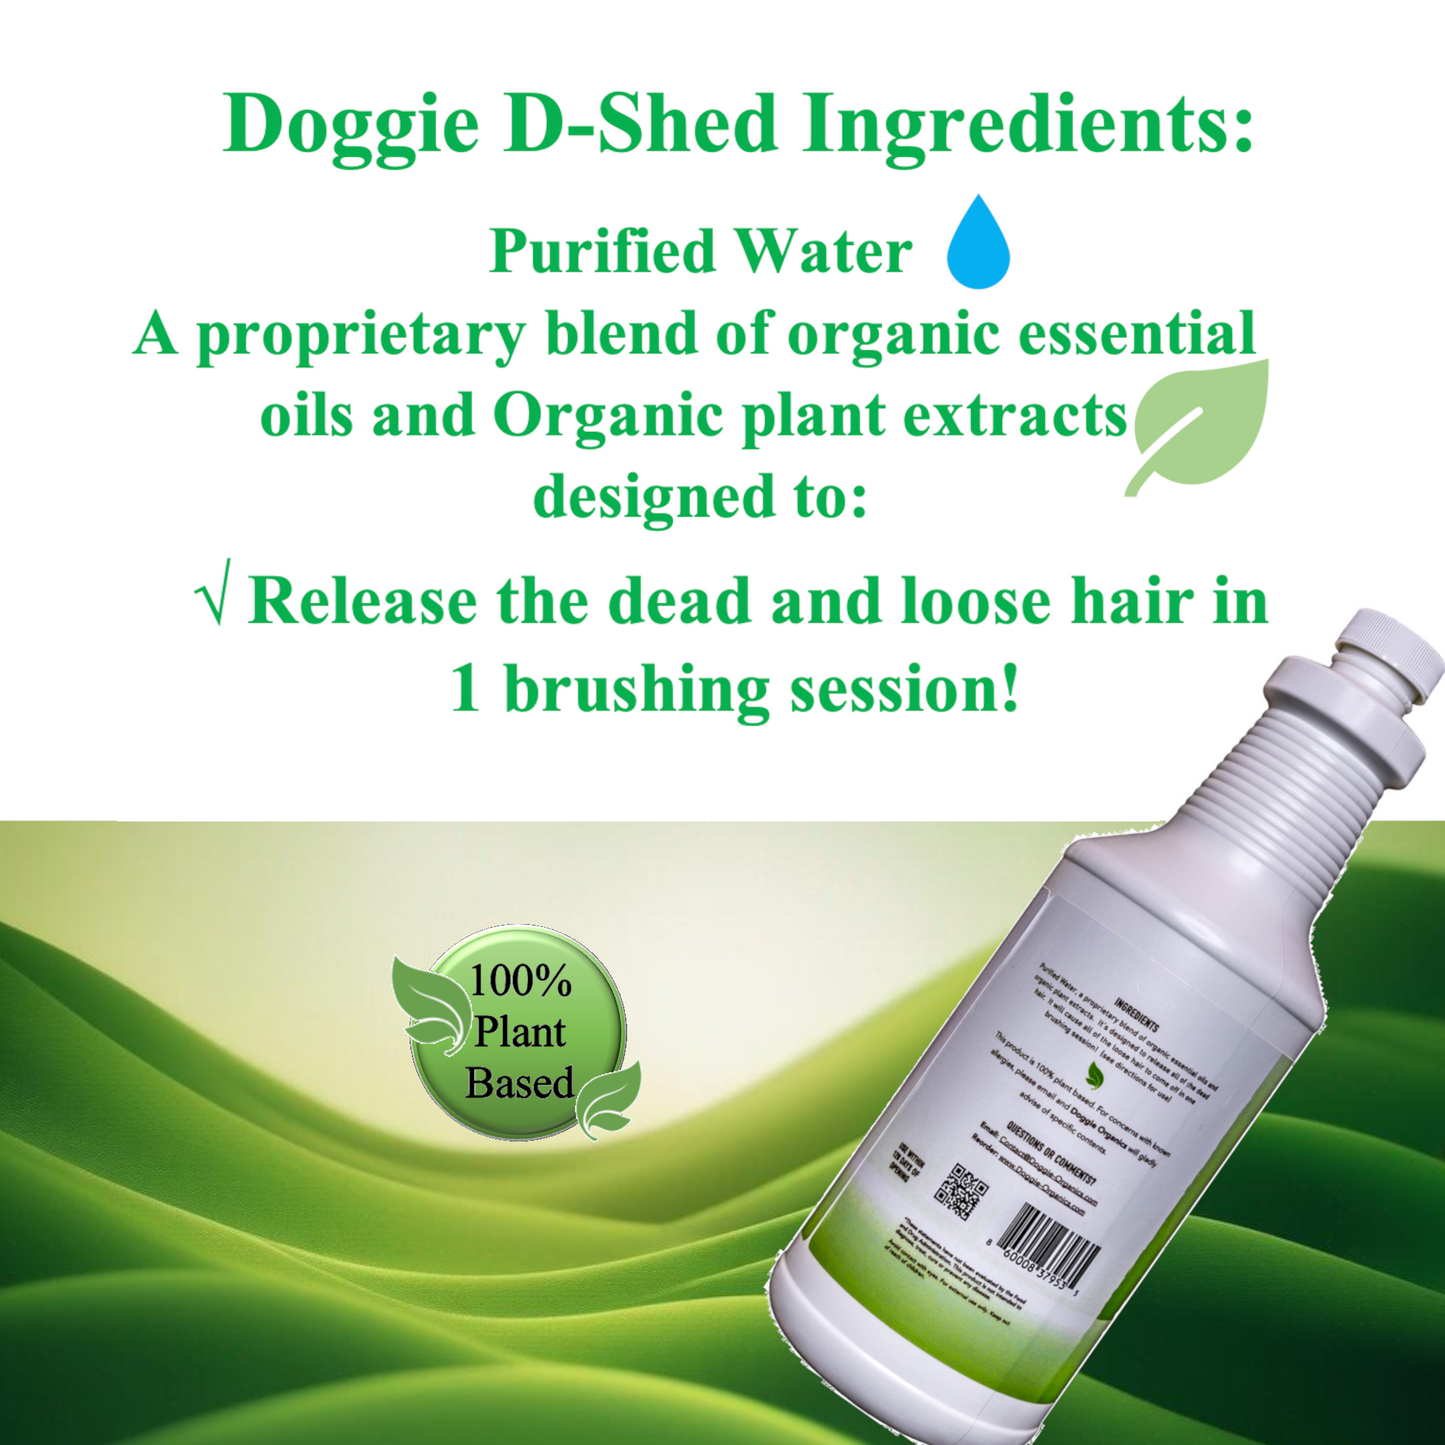 Doggie Organics D-Shed & Groom. Ingredients. Sprayer included.